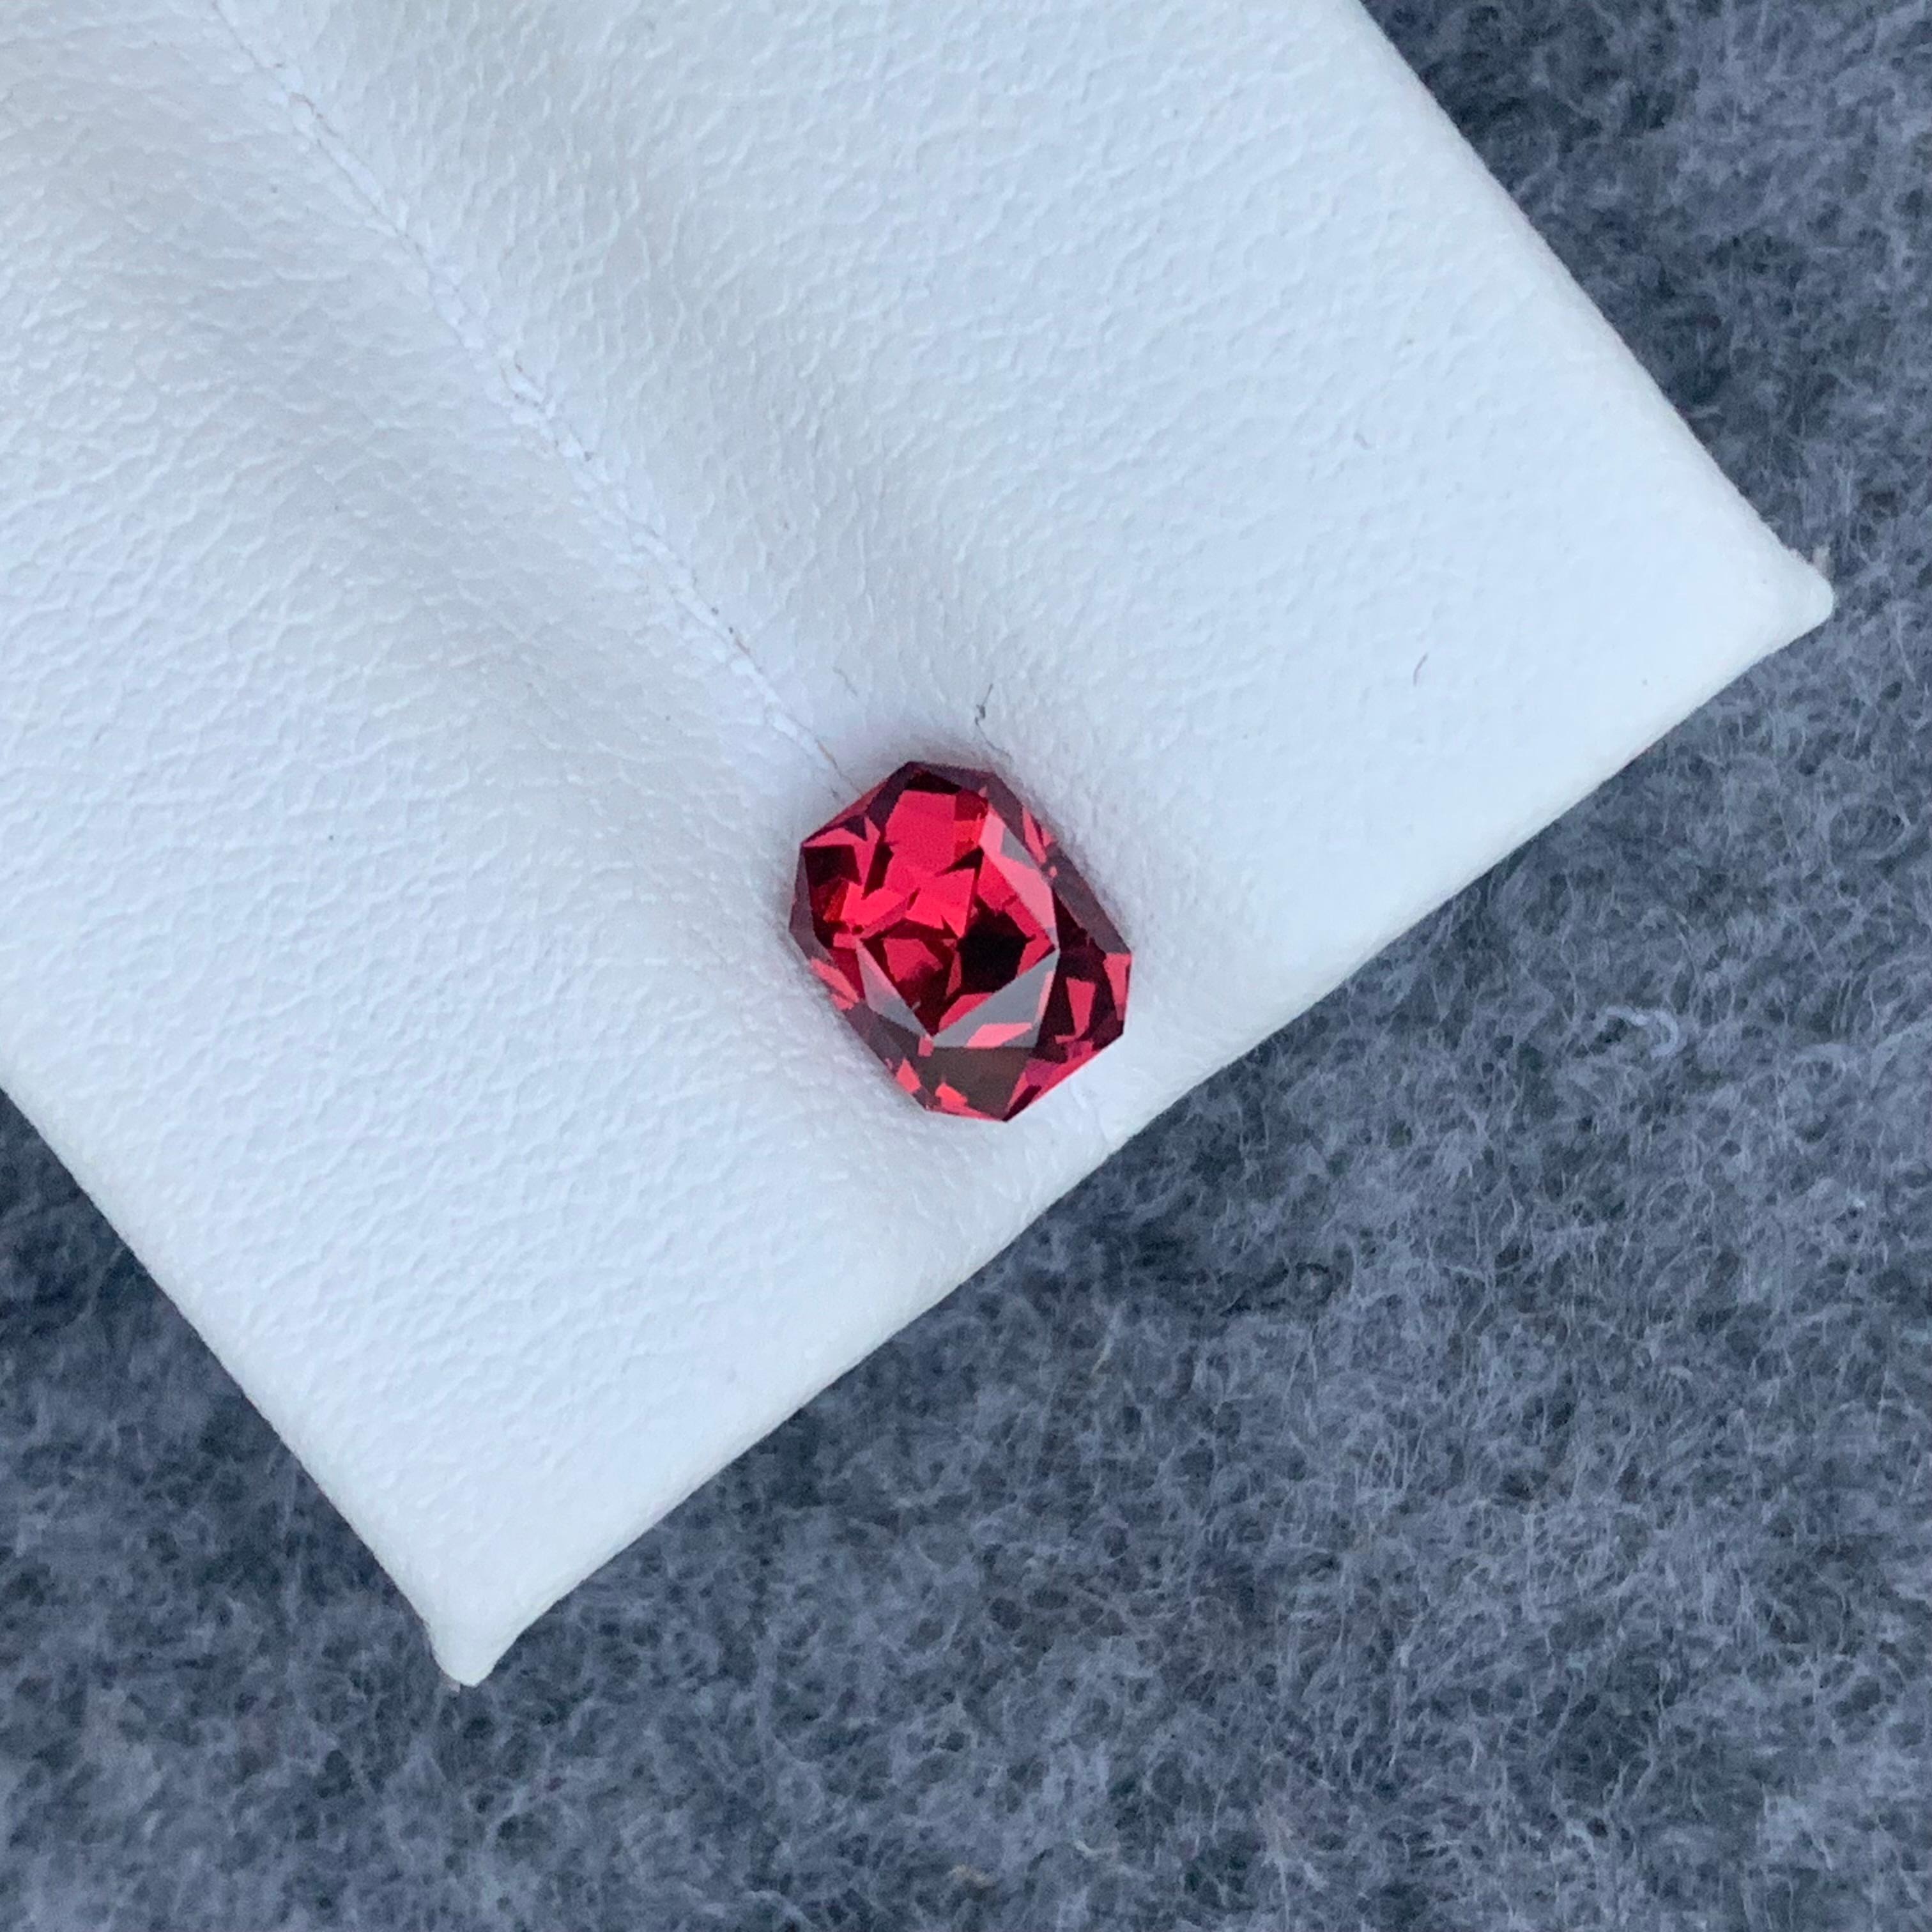 Loose Rhodolite Garnet
Weight : 1.40 Carats
Dimensions : 6.8x5.4x4.2 Mm
Origin : Tanzania Africa
Clarity : AAA 
Shape: Octagon
Cut: Bar Cut
Certificate: On Demand
Treatment: Non
Color: Red
Rhodolite is a mixture of pyrope and almandite garnets. The